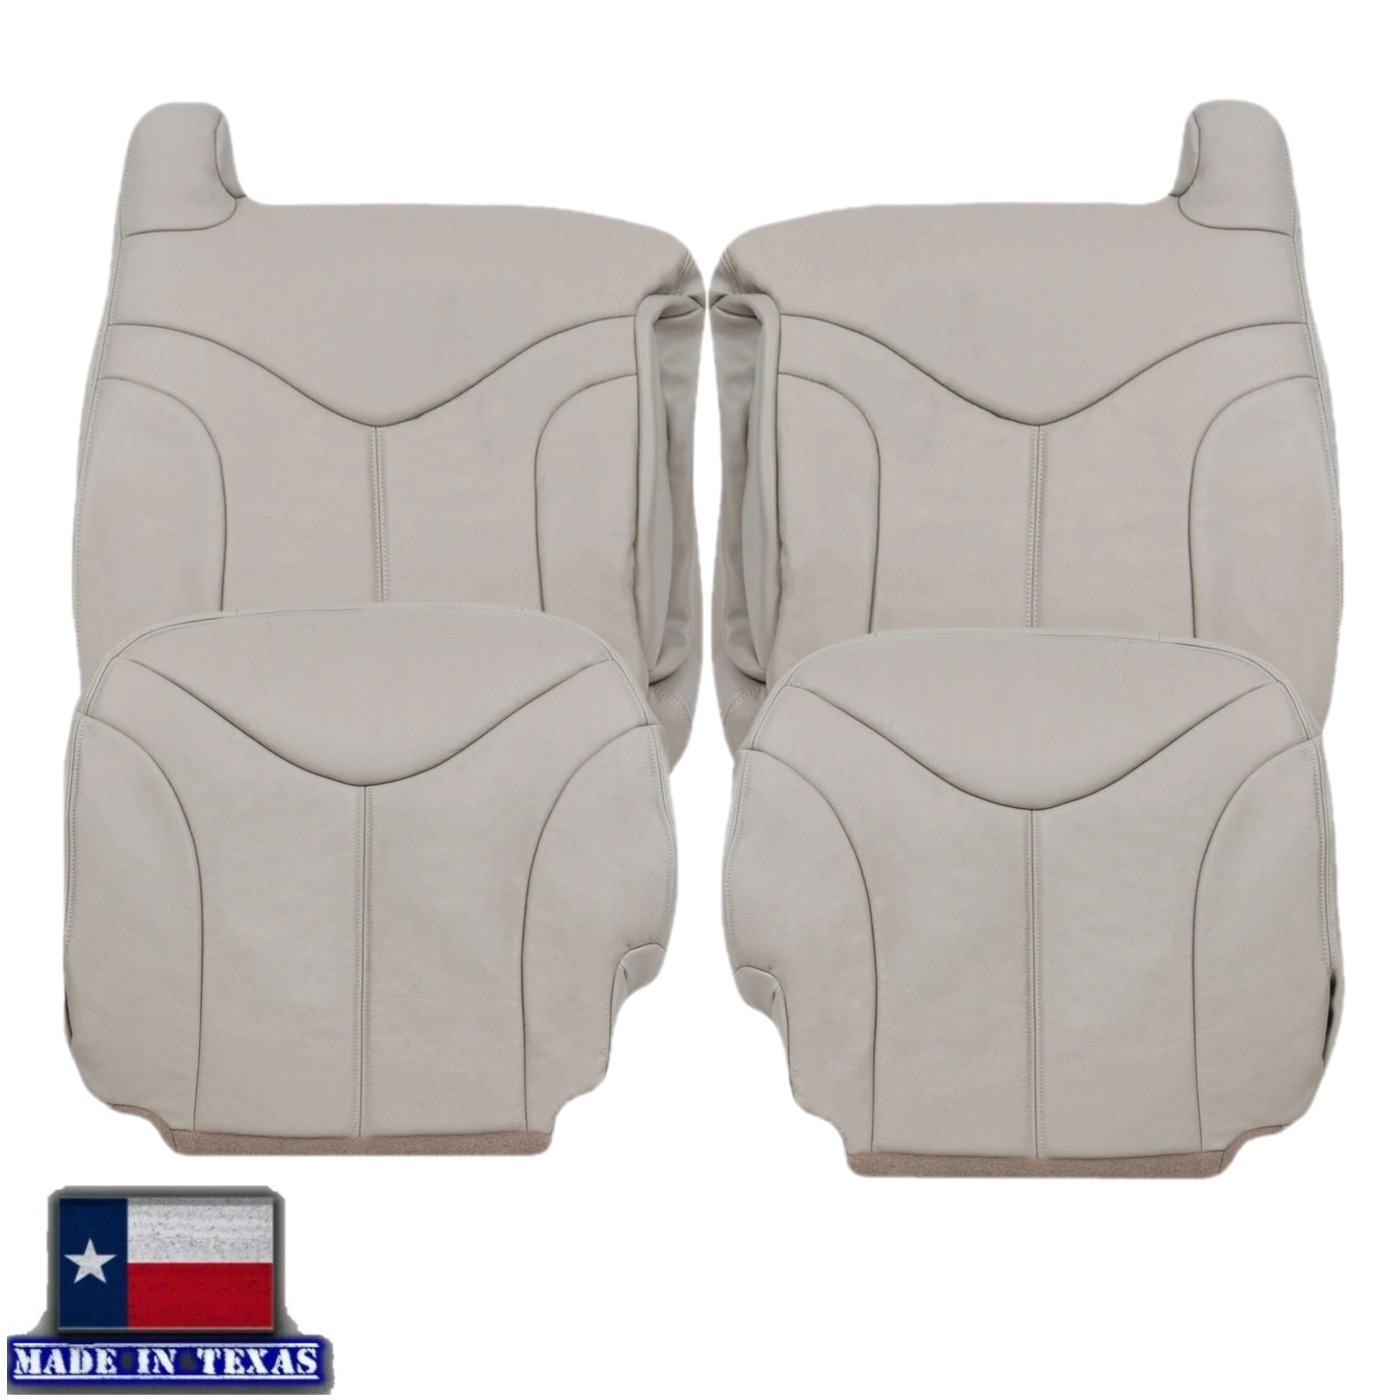 Front Seat Cover For 2000 2001 2002 GMC Yukon XL Syntetic Leather MADE IN TEXAS